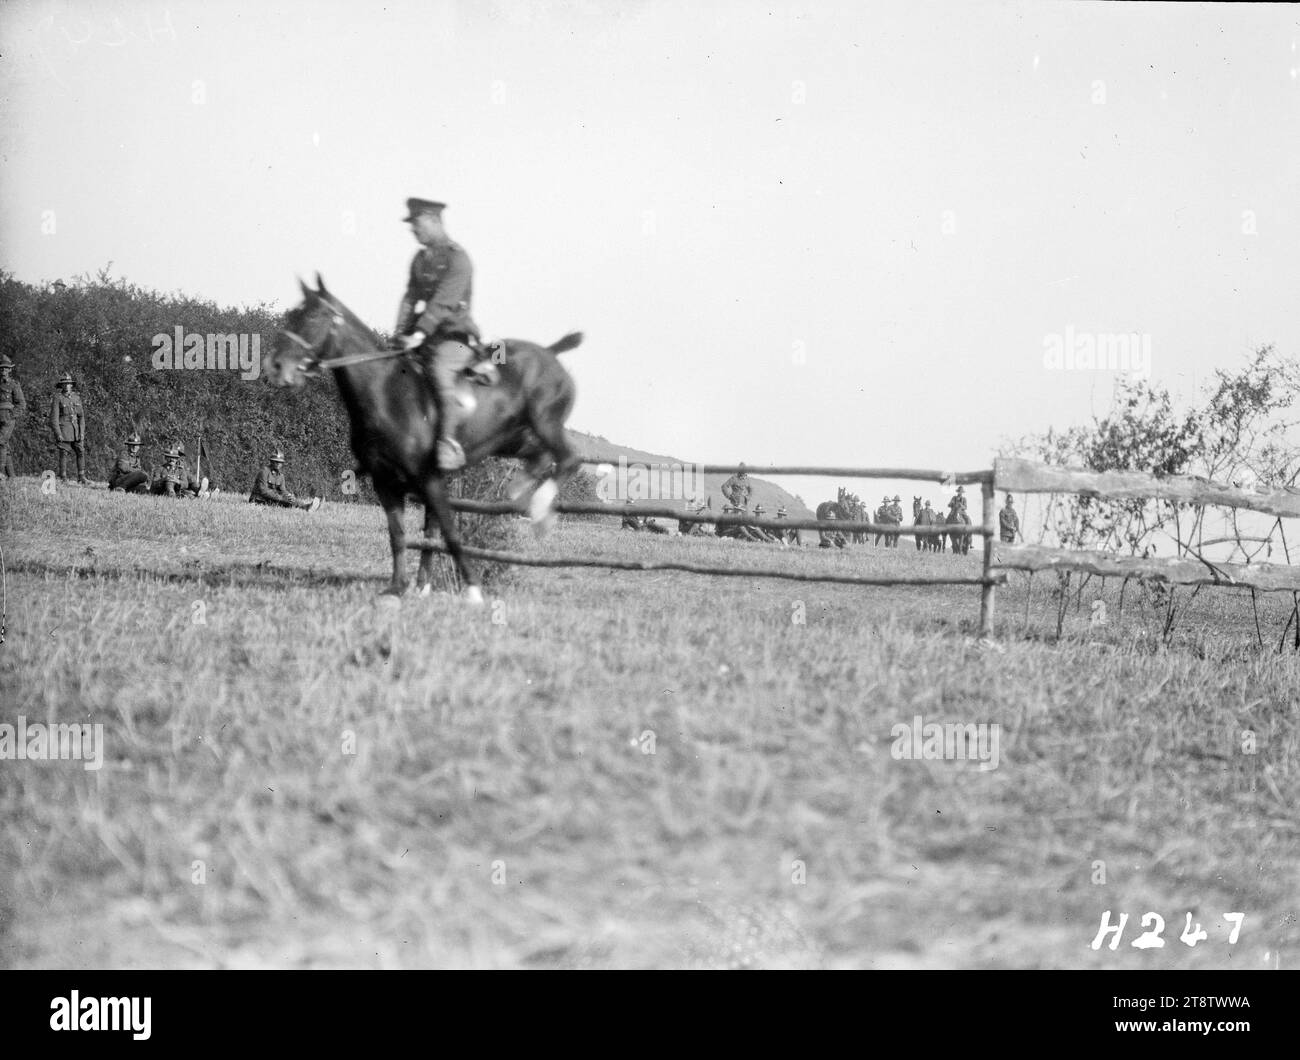 A horse and rider clear a jump at the Anzac Horse Show, World War I, A horse and rider clear a jump in the jumping competition at the Anzac Horse Show during World War I. Photograph taken France 15 September 1917 Stock Photo